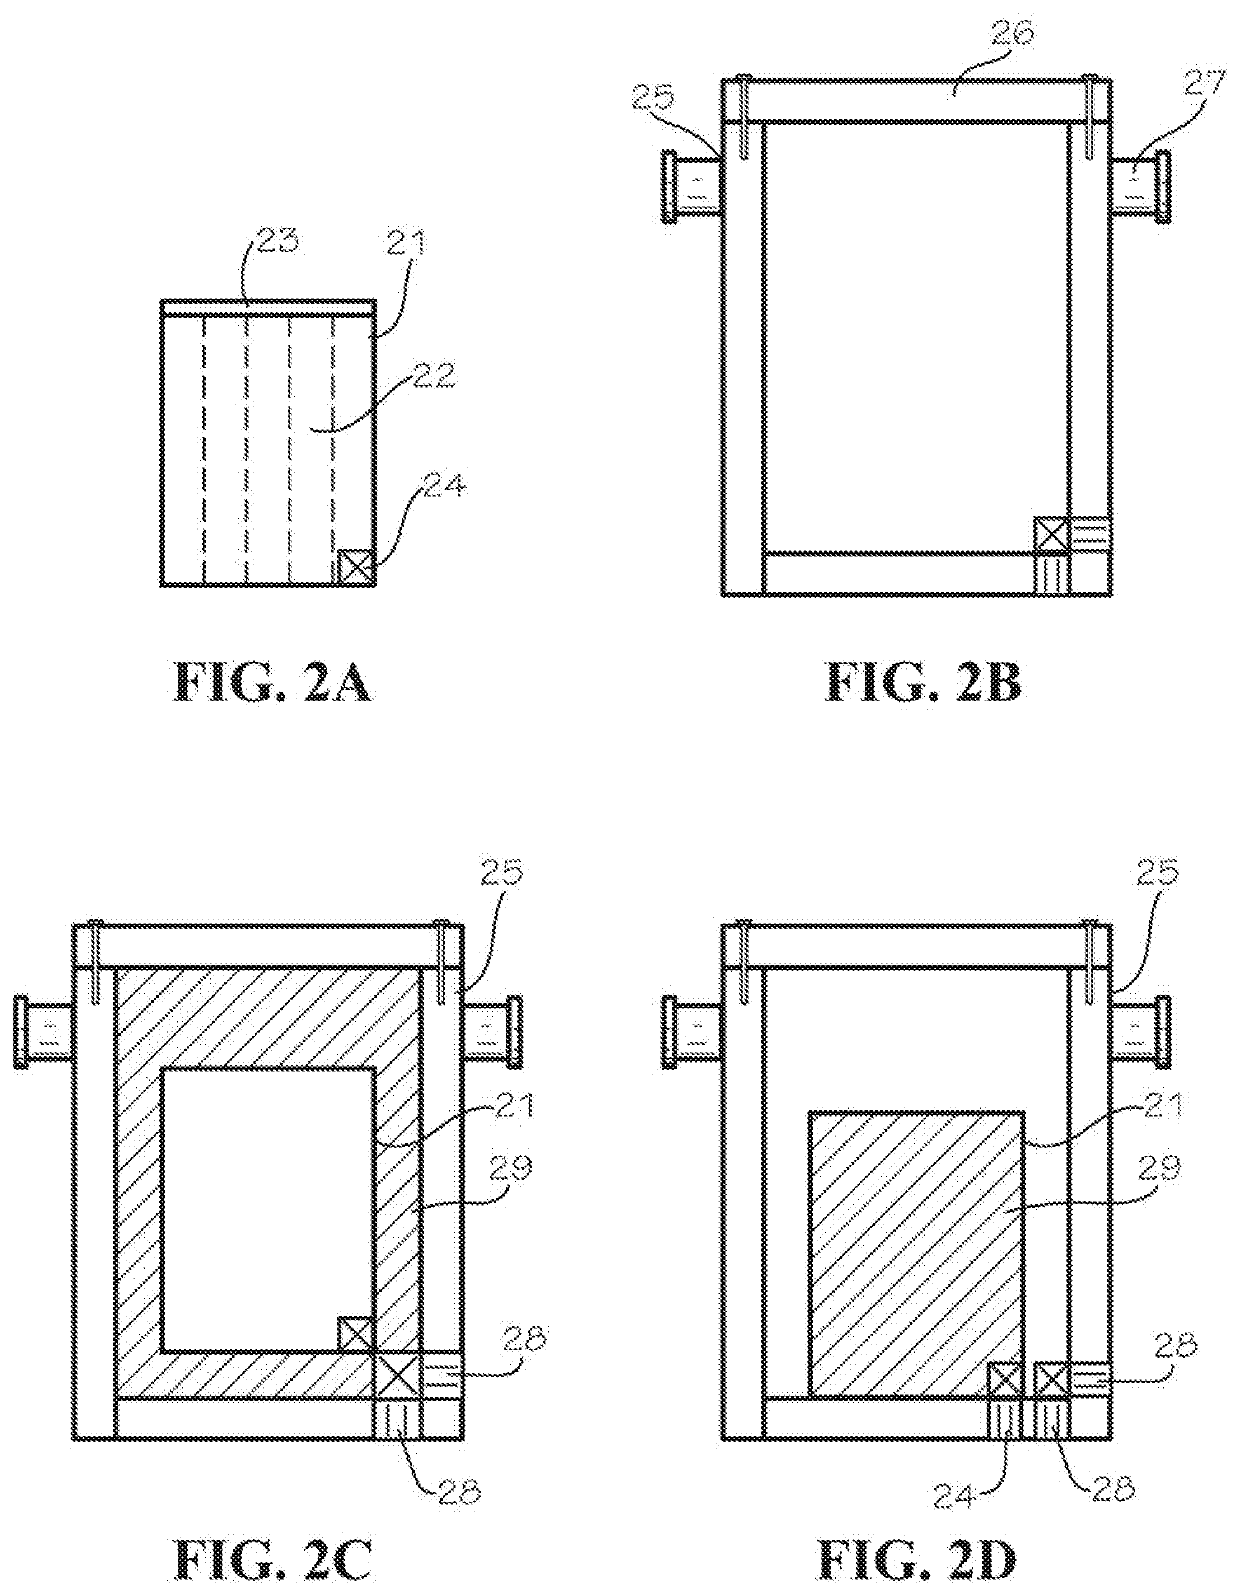 Apparatus and methods for storing hazardous waste materials by encasing same in a fusible metal alloy